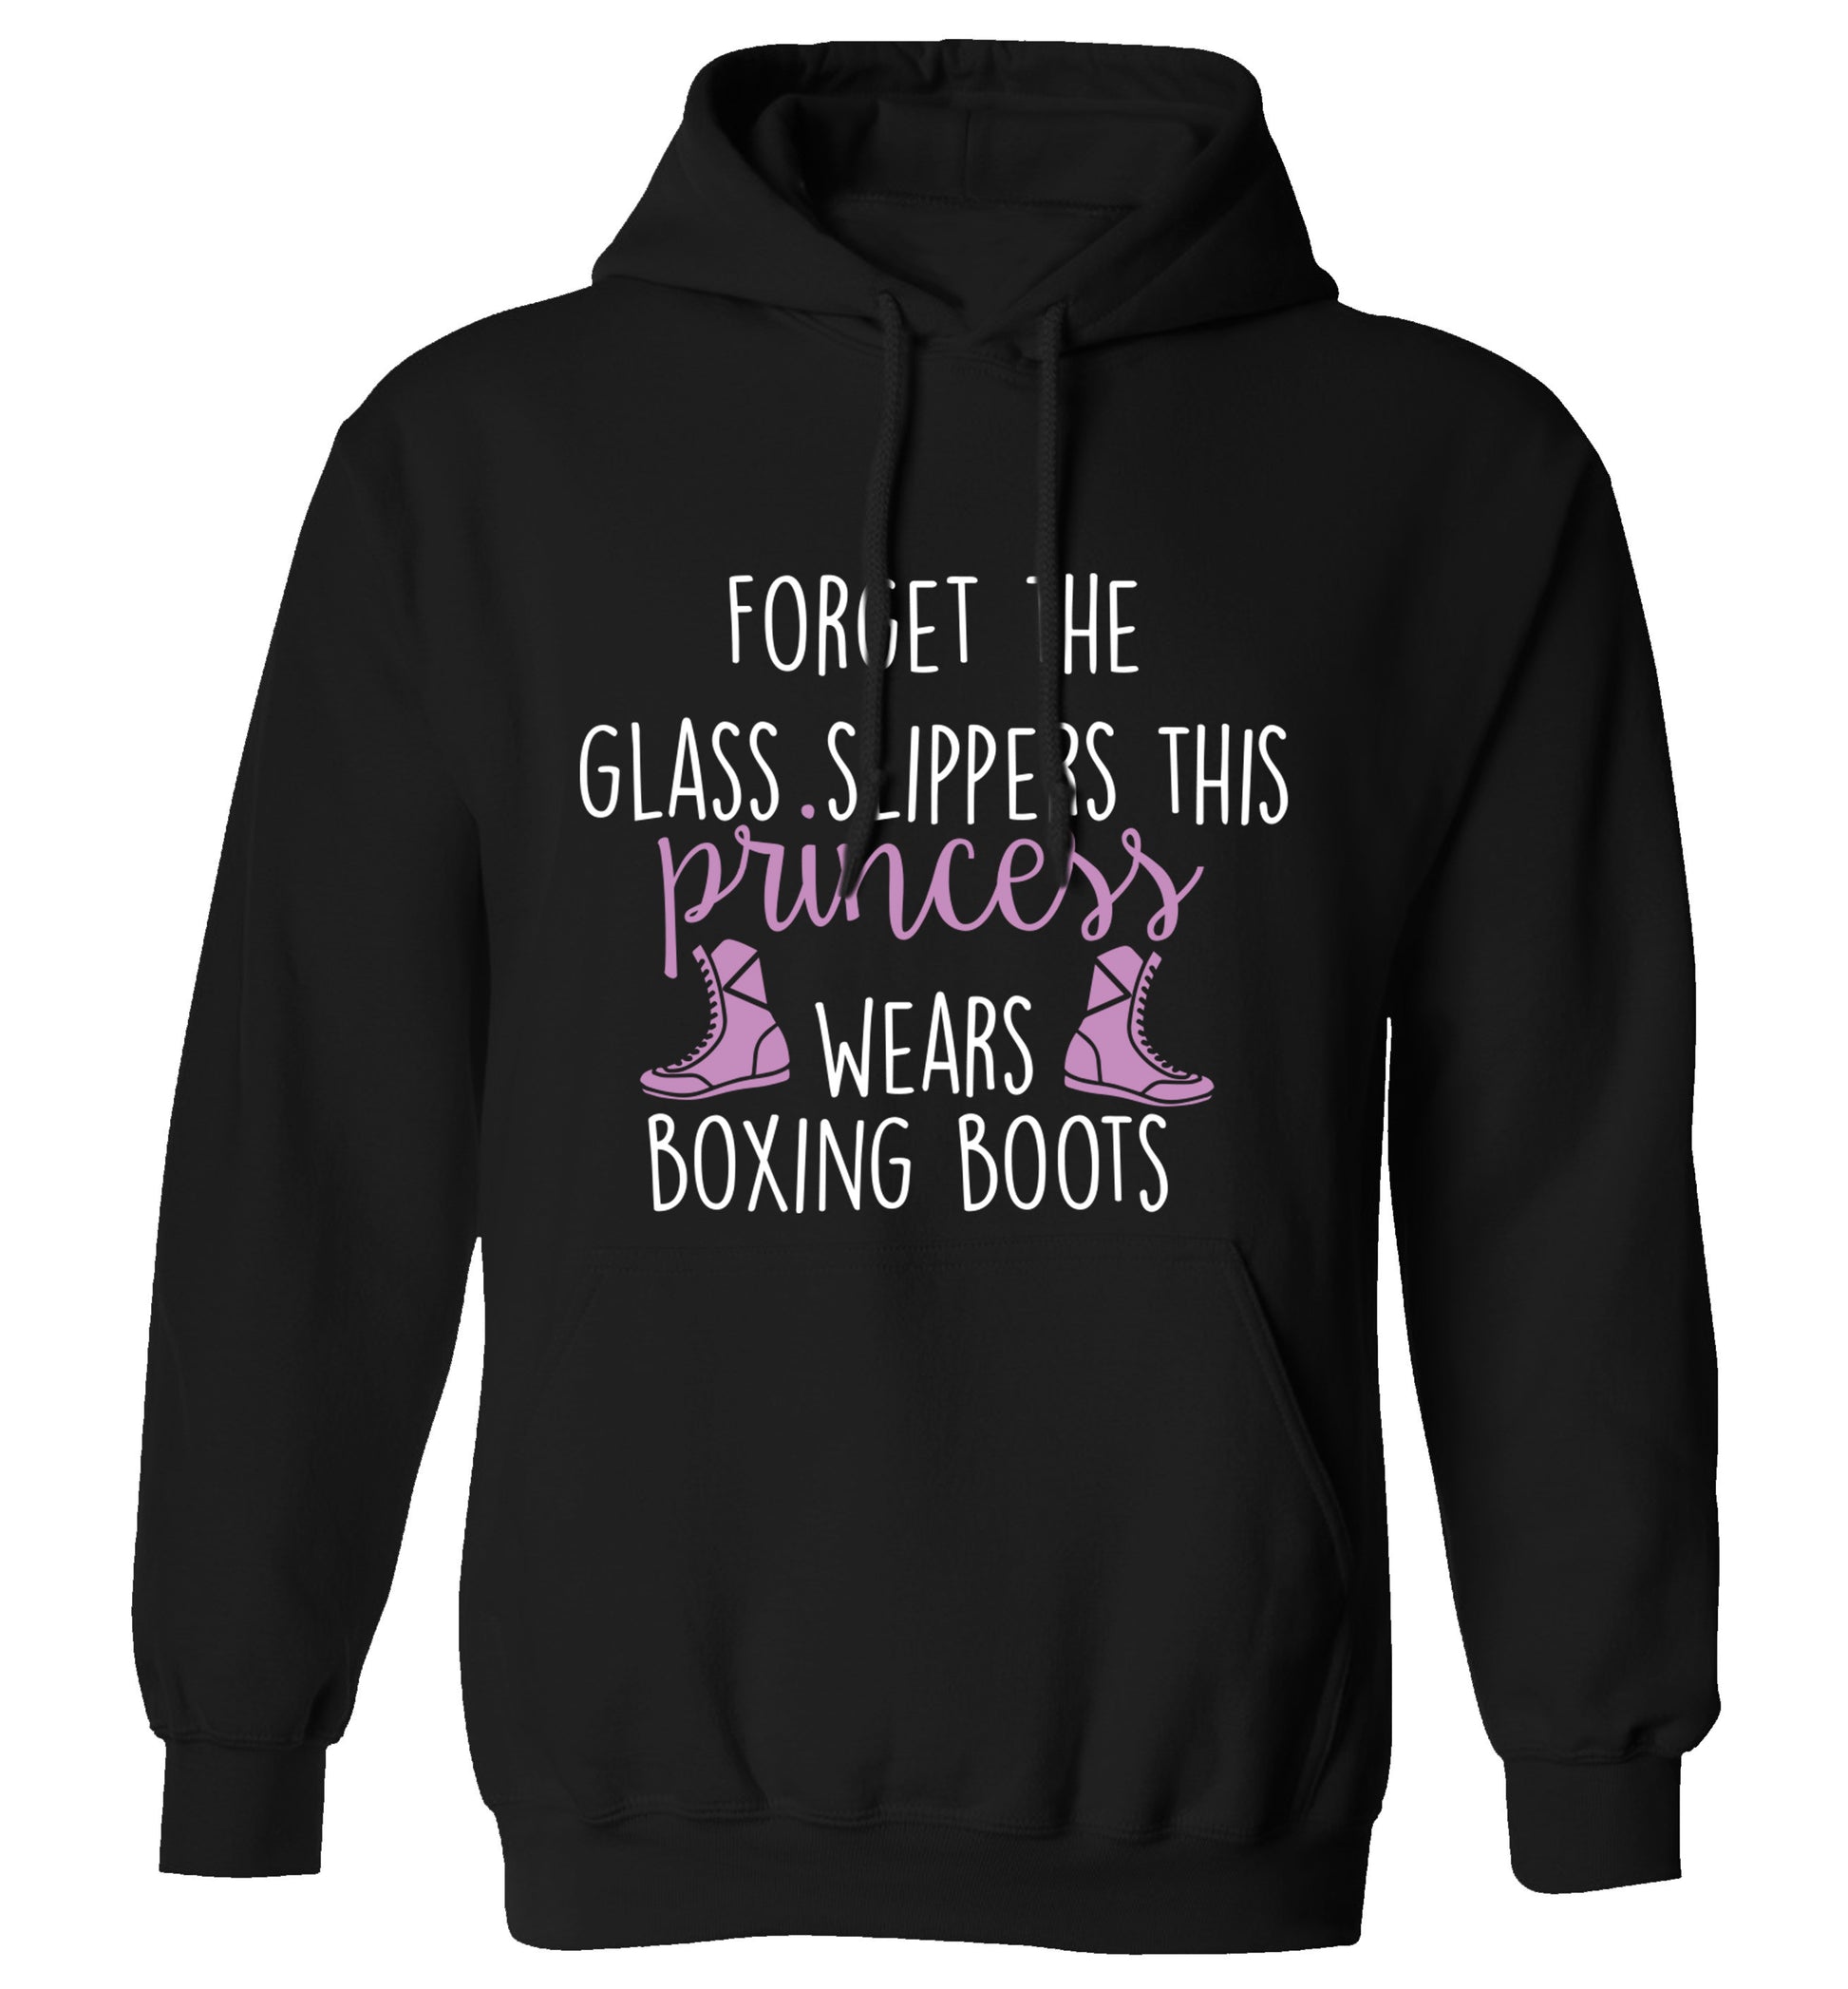 Forget the glass slippers this princess wears boxing boots adults unisex black hoodie 2XL